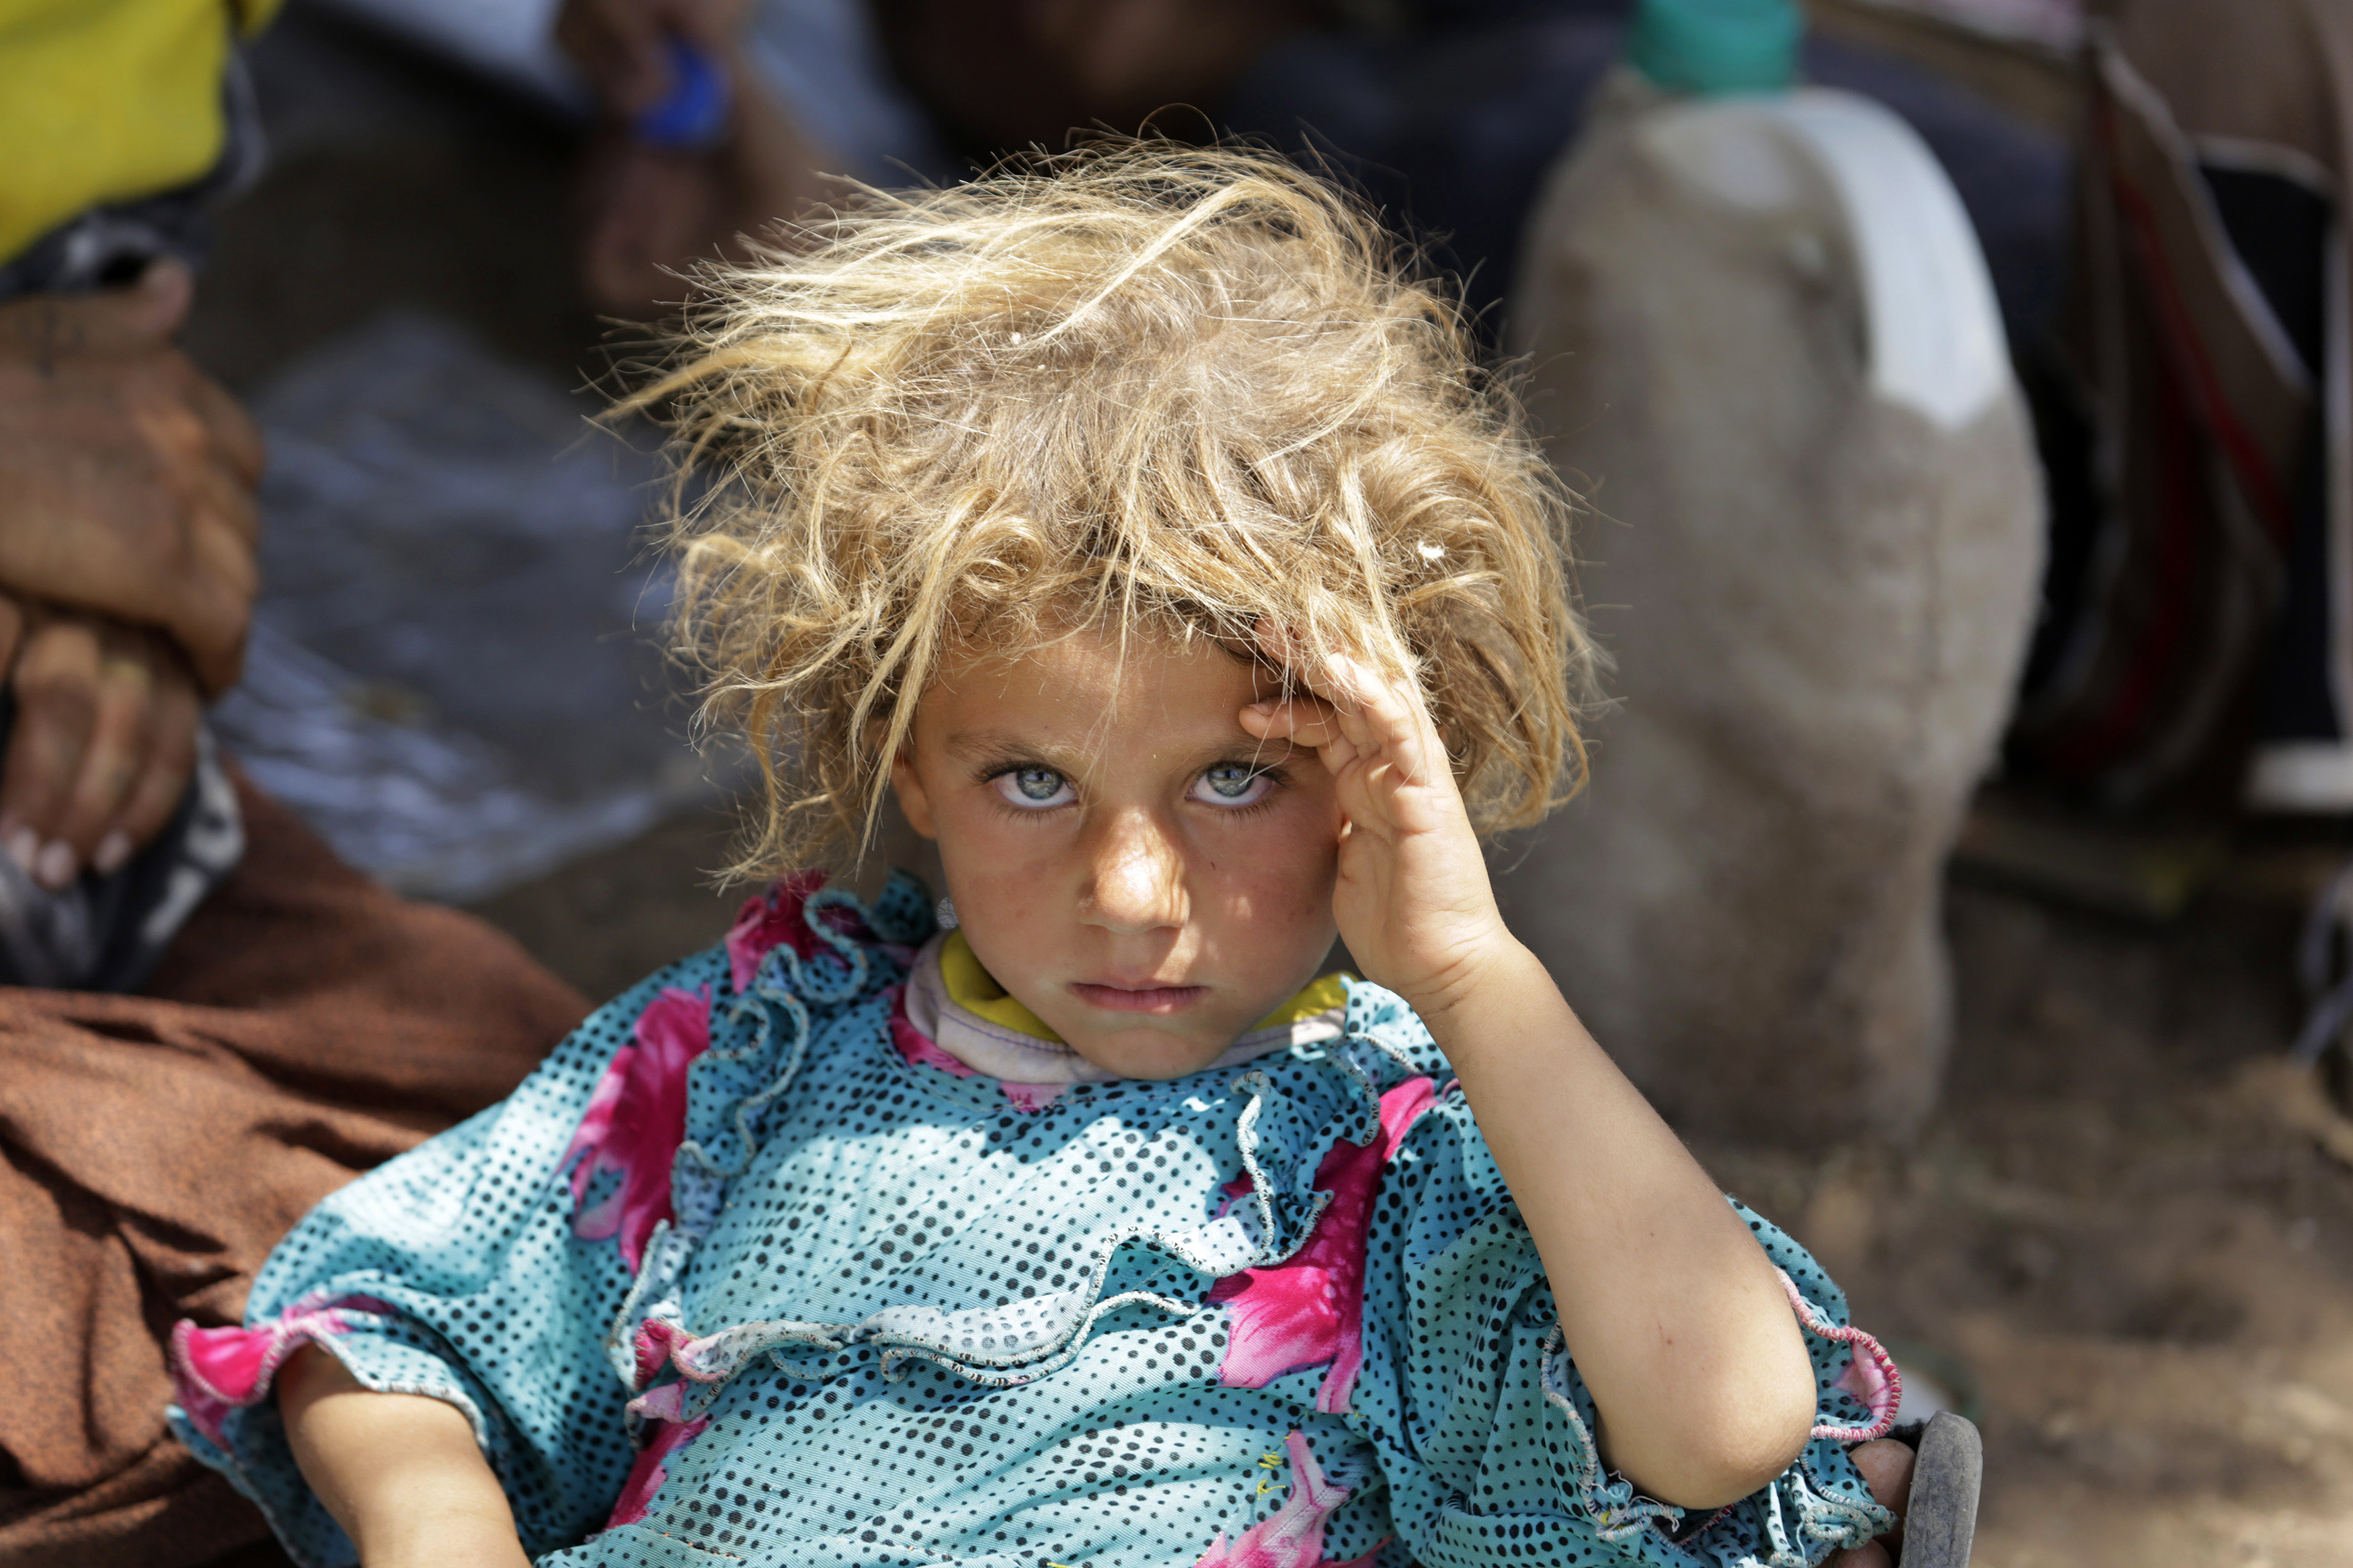 A girl from the minority Yazidi sect, fleeing the violence in the Iraqi town of Sinjar, rests at the Iraqi-Syrian border crossing in Fishkhabour